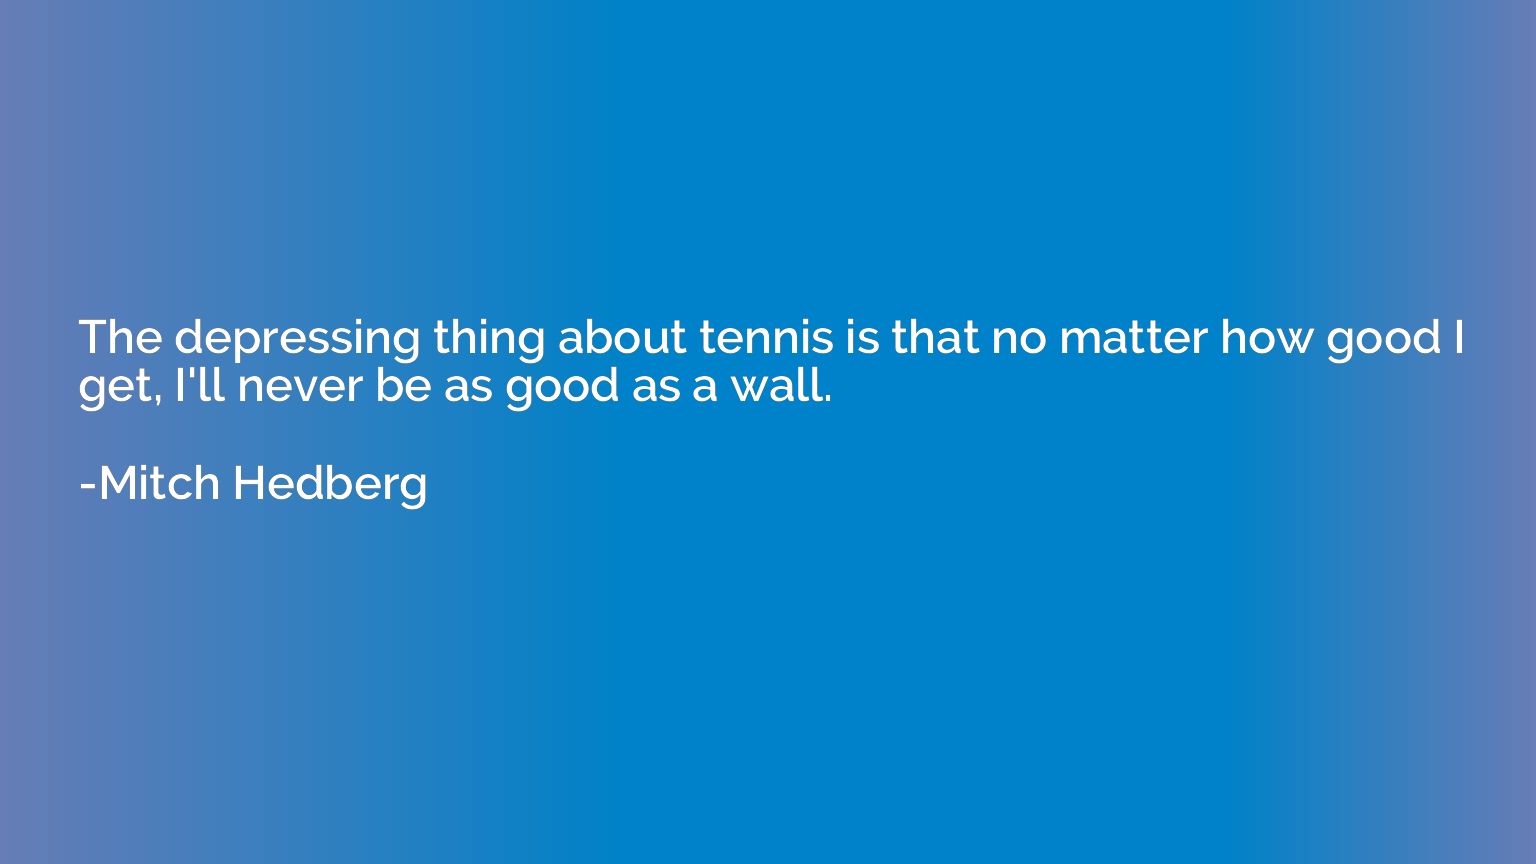 The depressing thing about tennis is that no matter how good